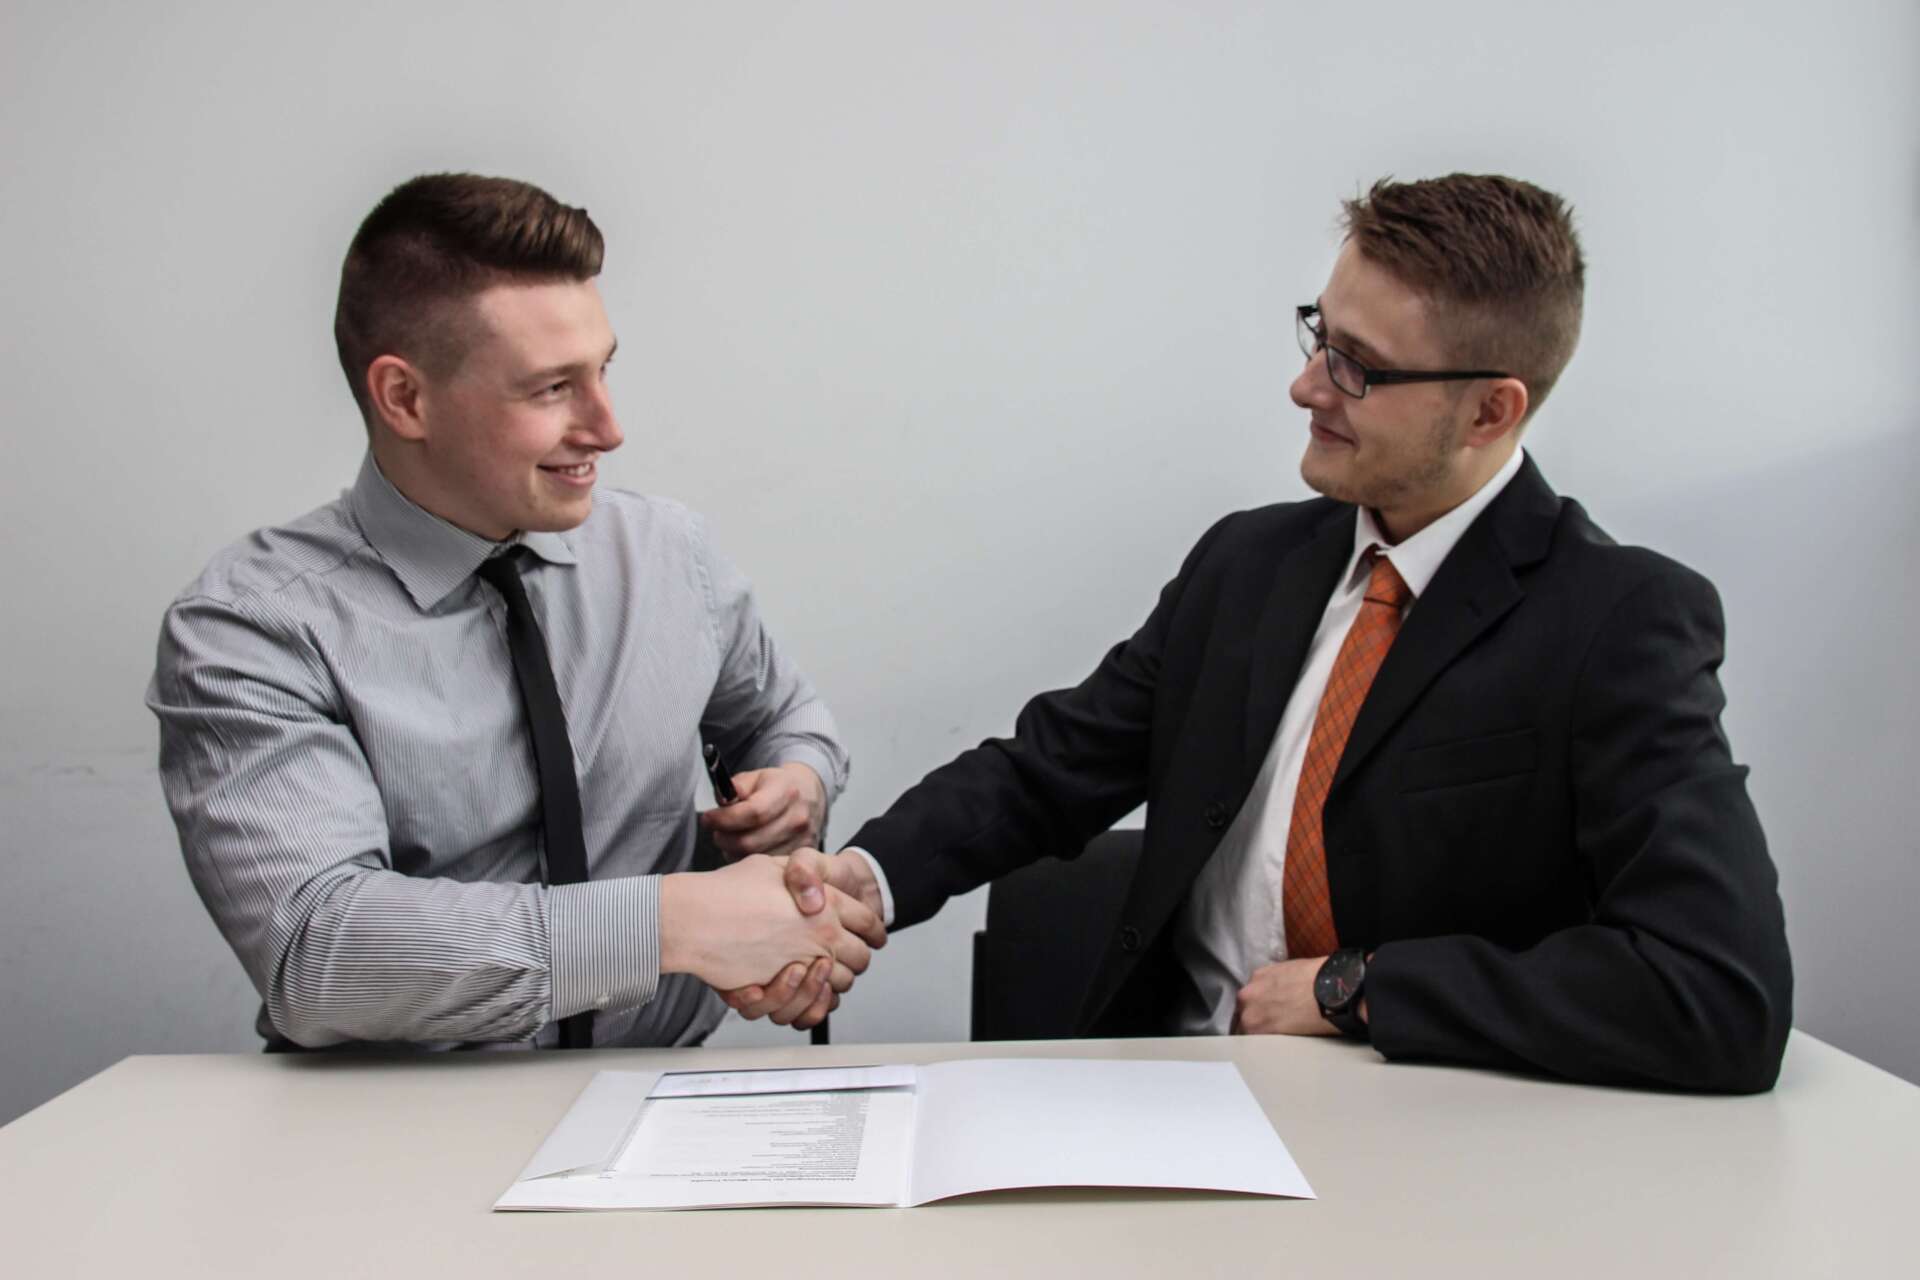 Business Agreement Two Men Shaking Hands